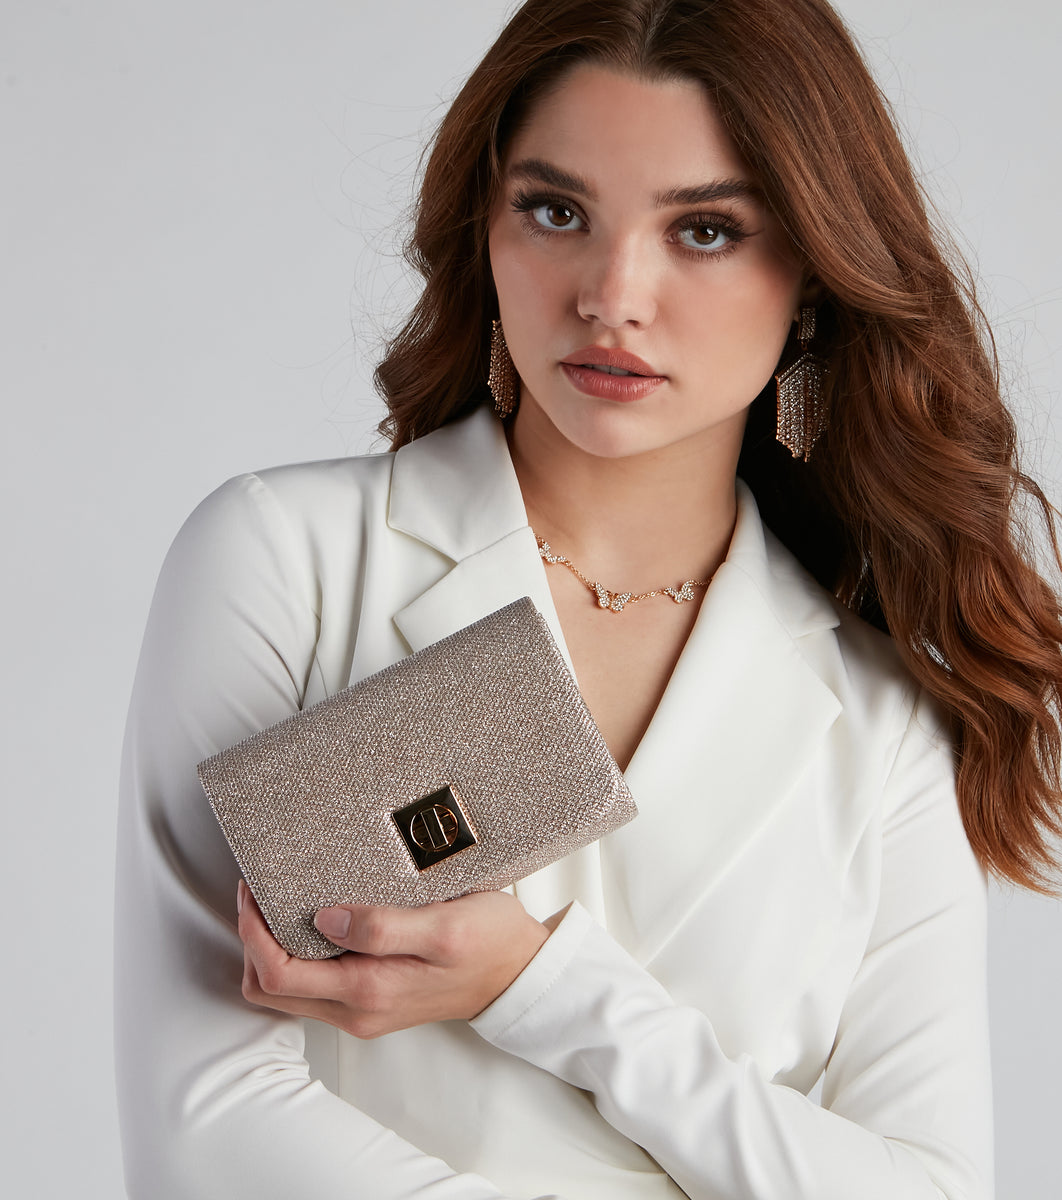 All About The Glitz And Glam Clutch